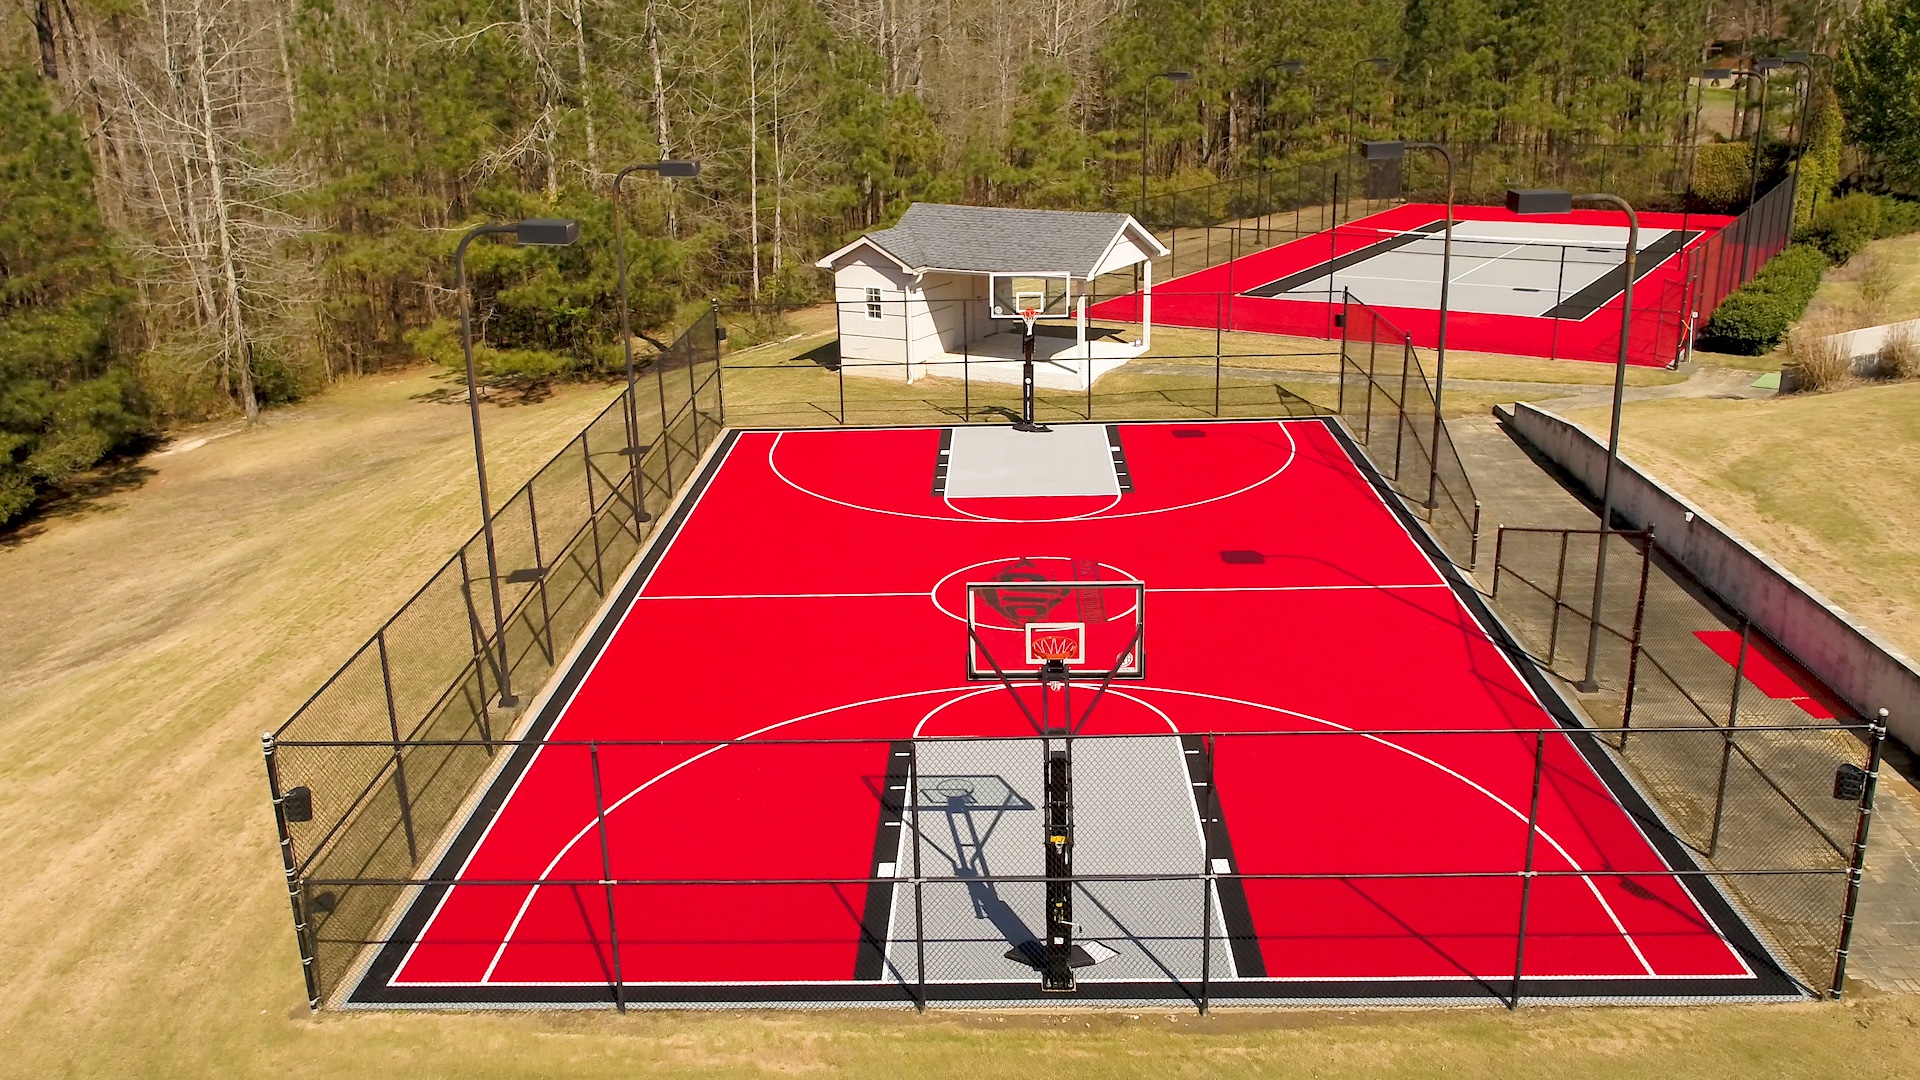 Sky view of Ludacris' SnapSports full basketball and tennis courts located on his property in Georgia.